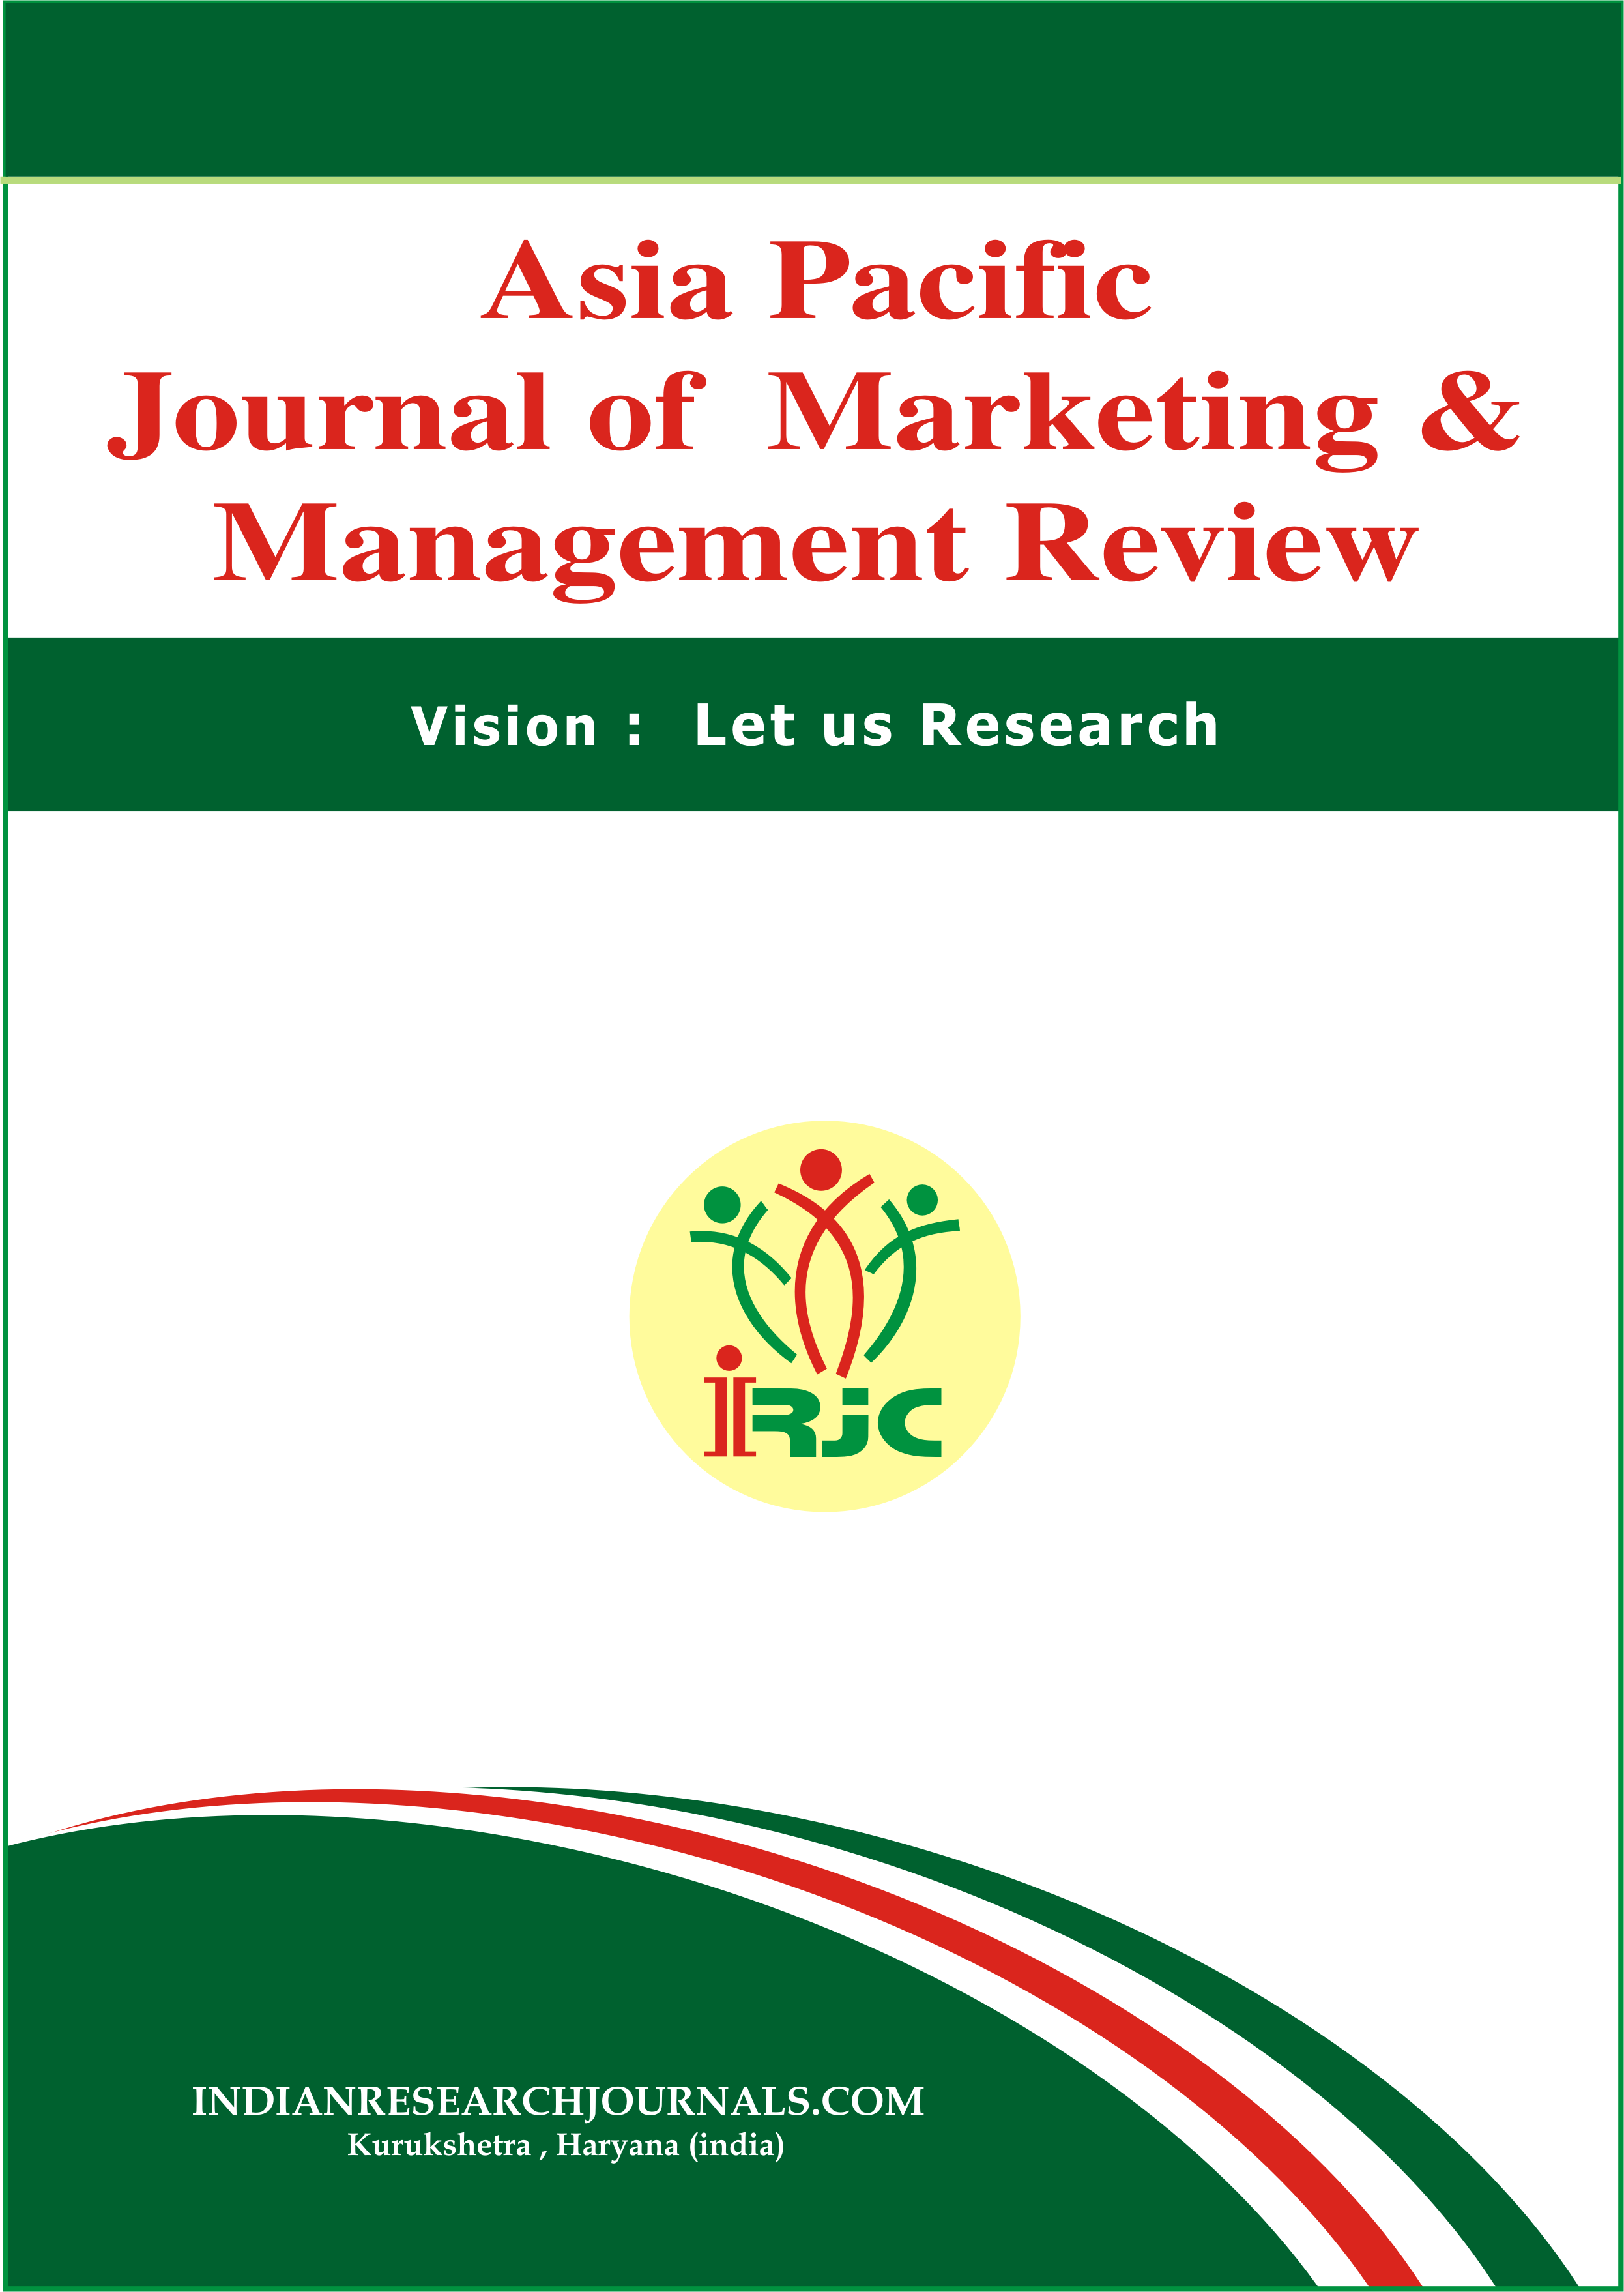 					View Vol. 11 No. 07 (2022): ASIA PACIFIC JOURNAL OF MARKETING & MANAGEMENT REVIEW
				